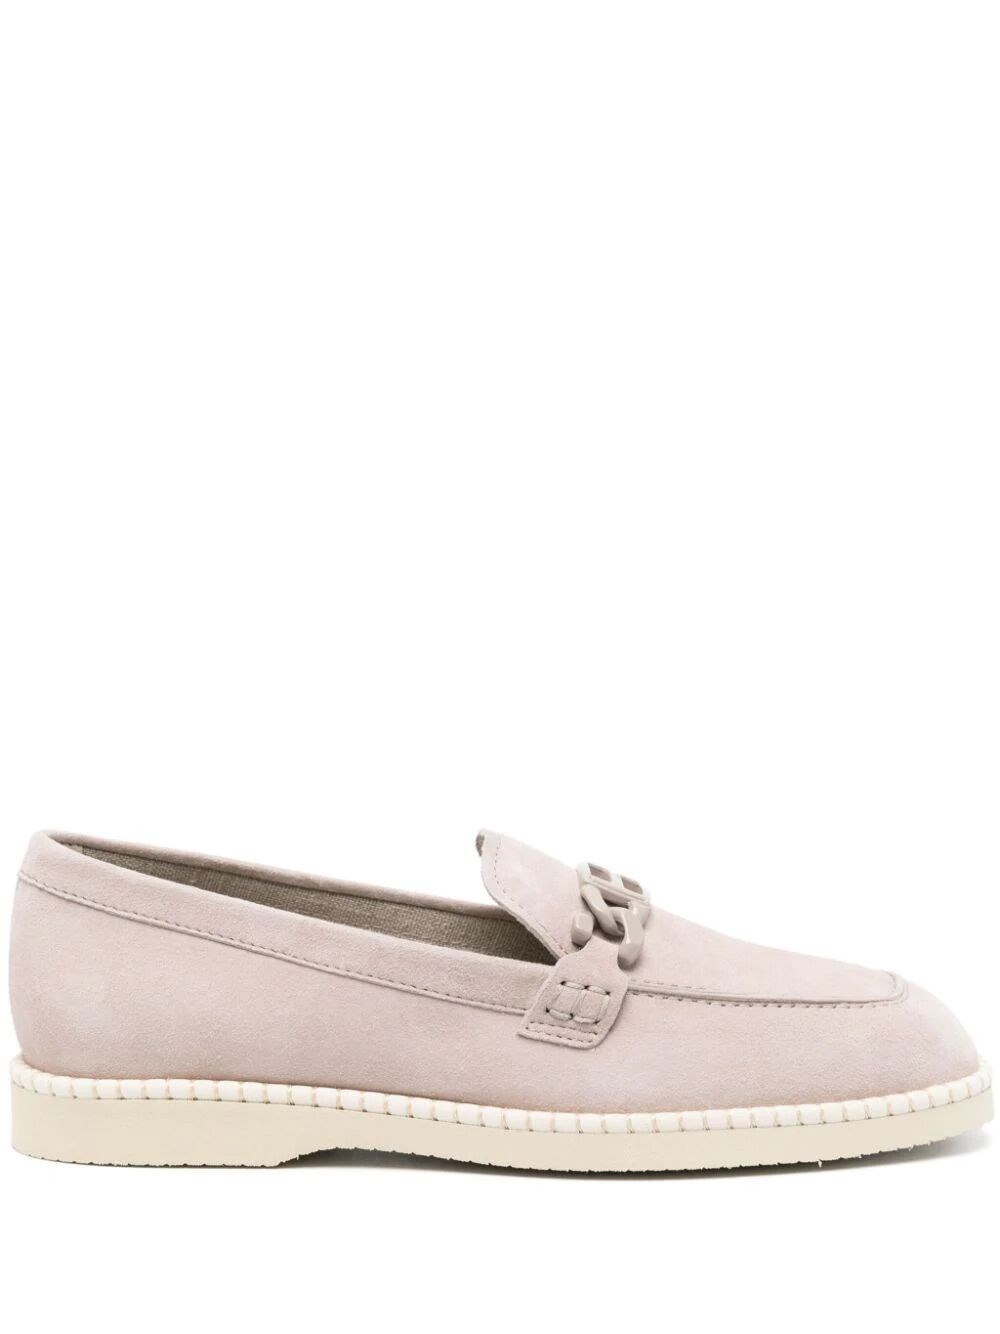 Hogan Olympia-z Suede Loafers In Nude & Neutrals